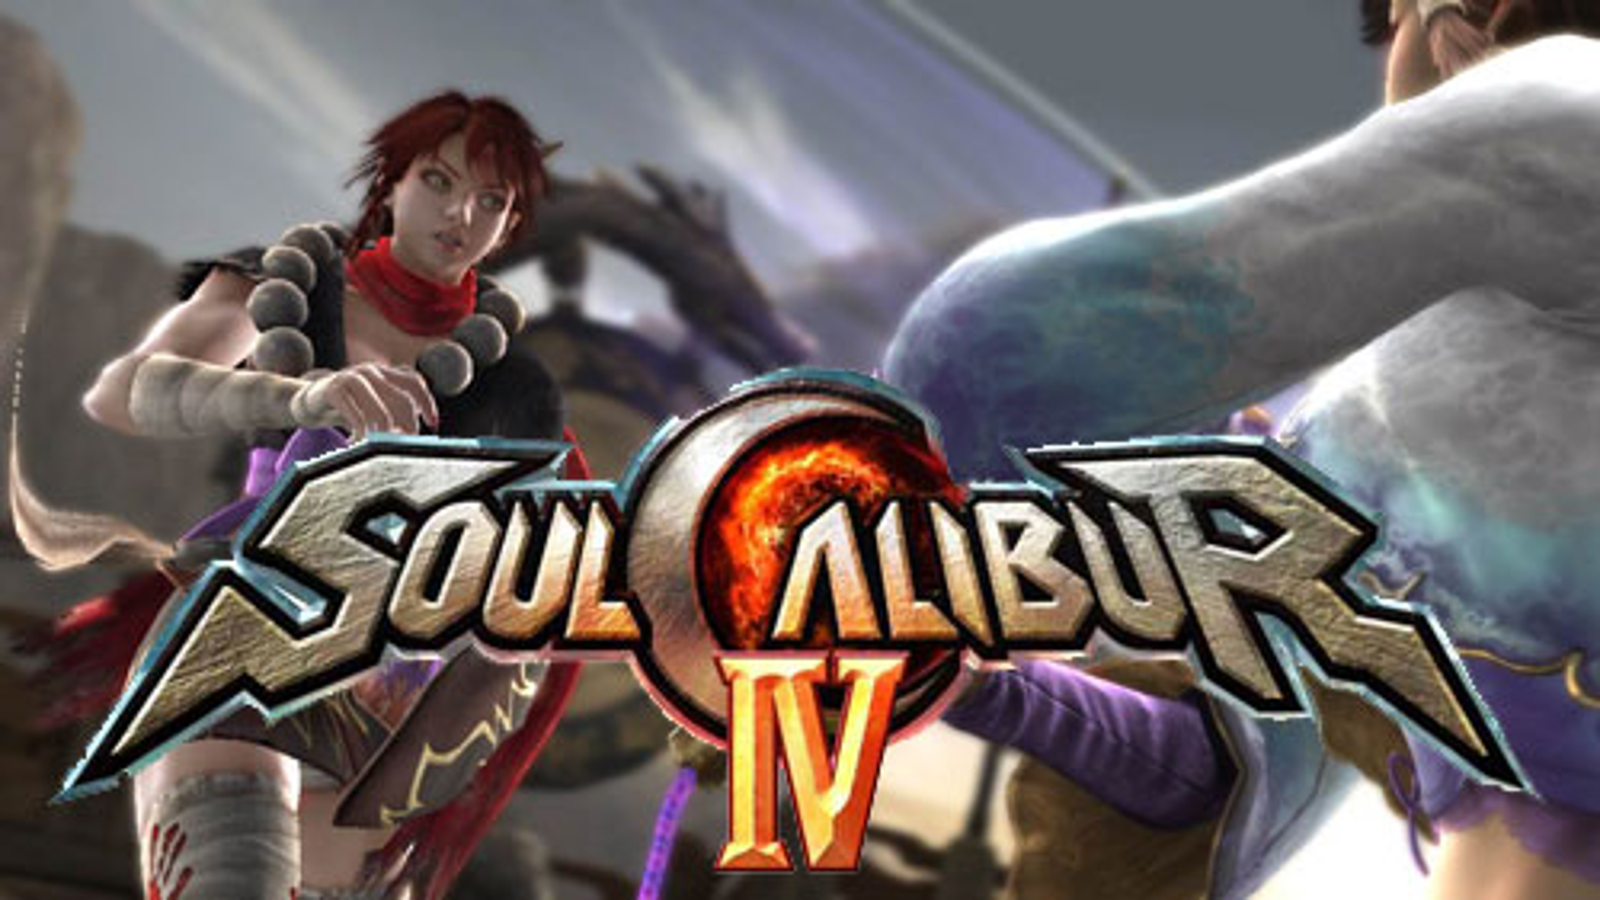 soulcalibur iv and street fighter 4